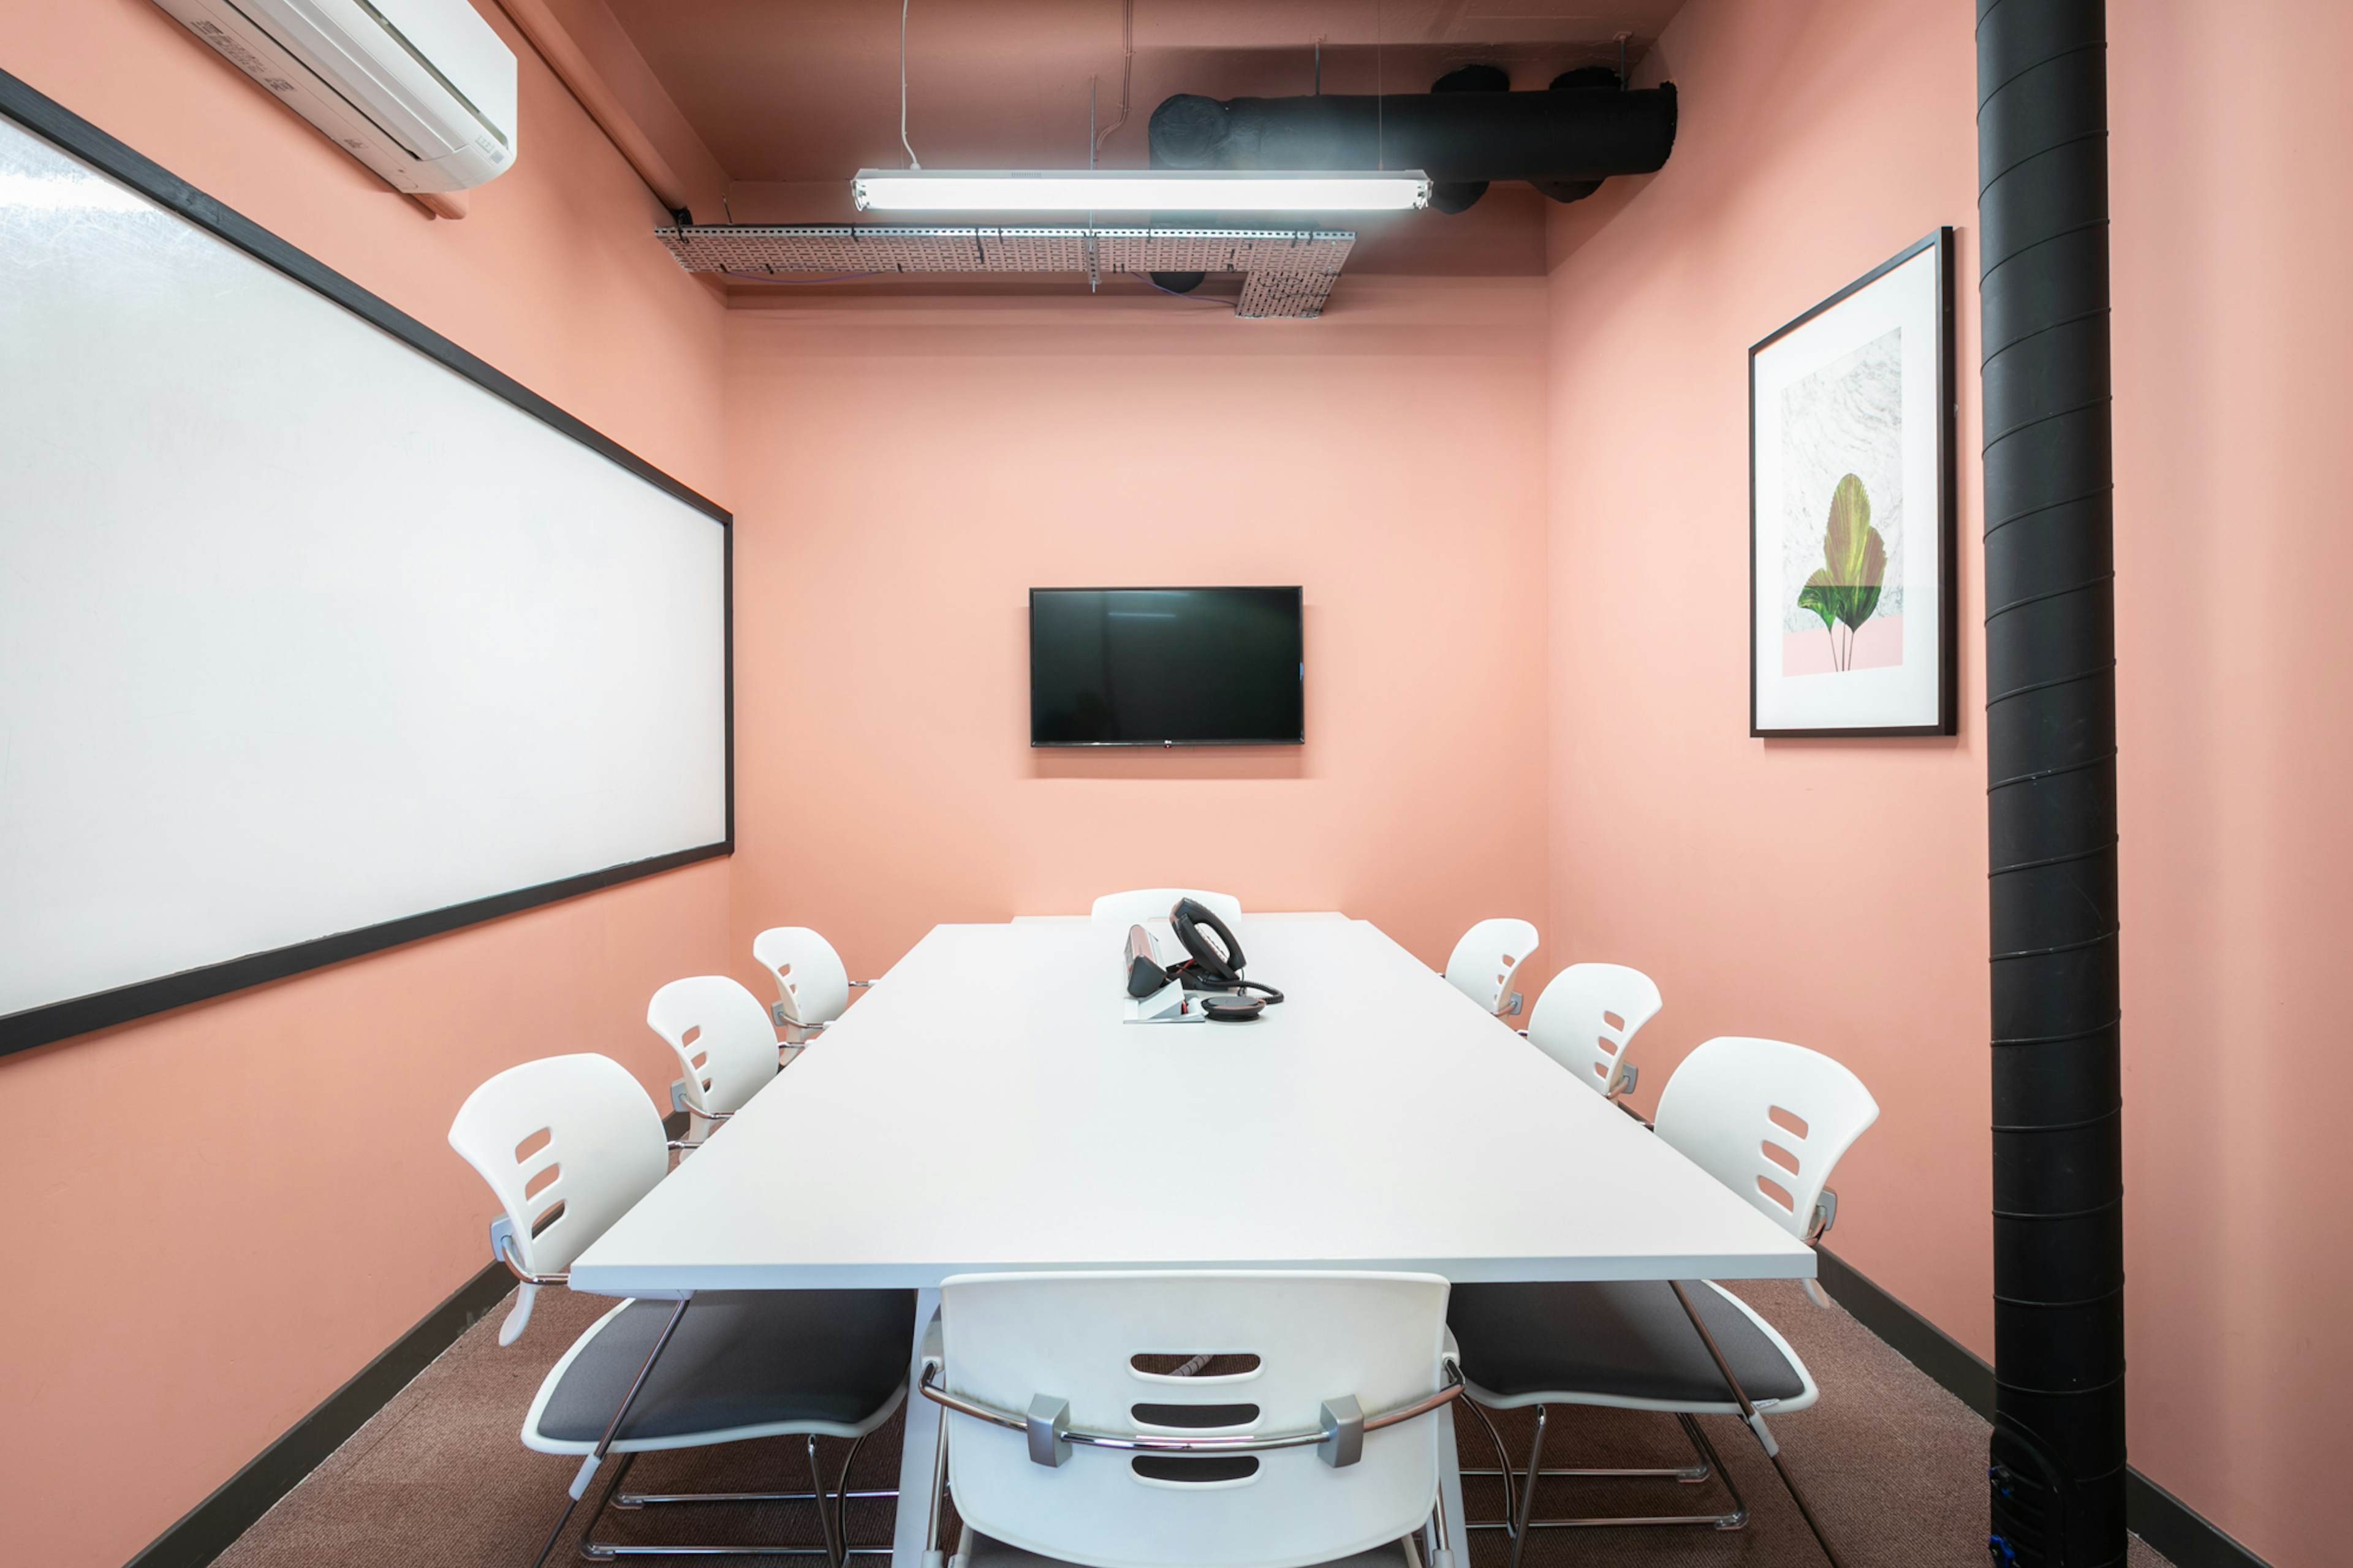 Moneypenny Workhub - Meeting Room 1: The Pink Room image 2